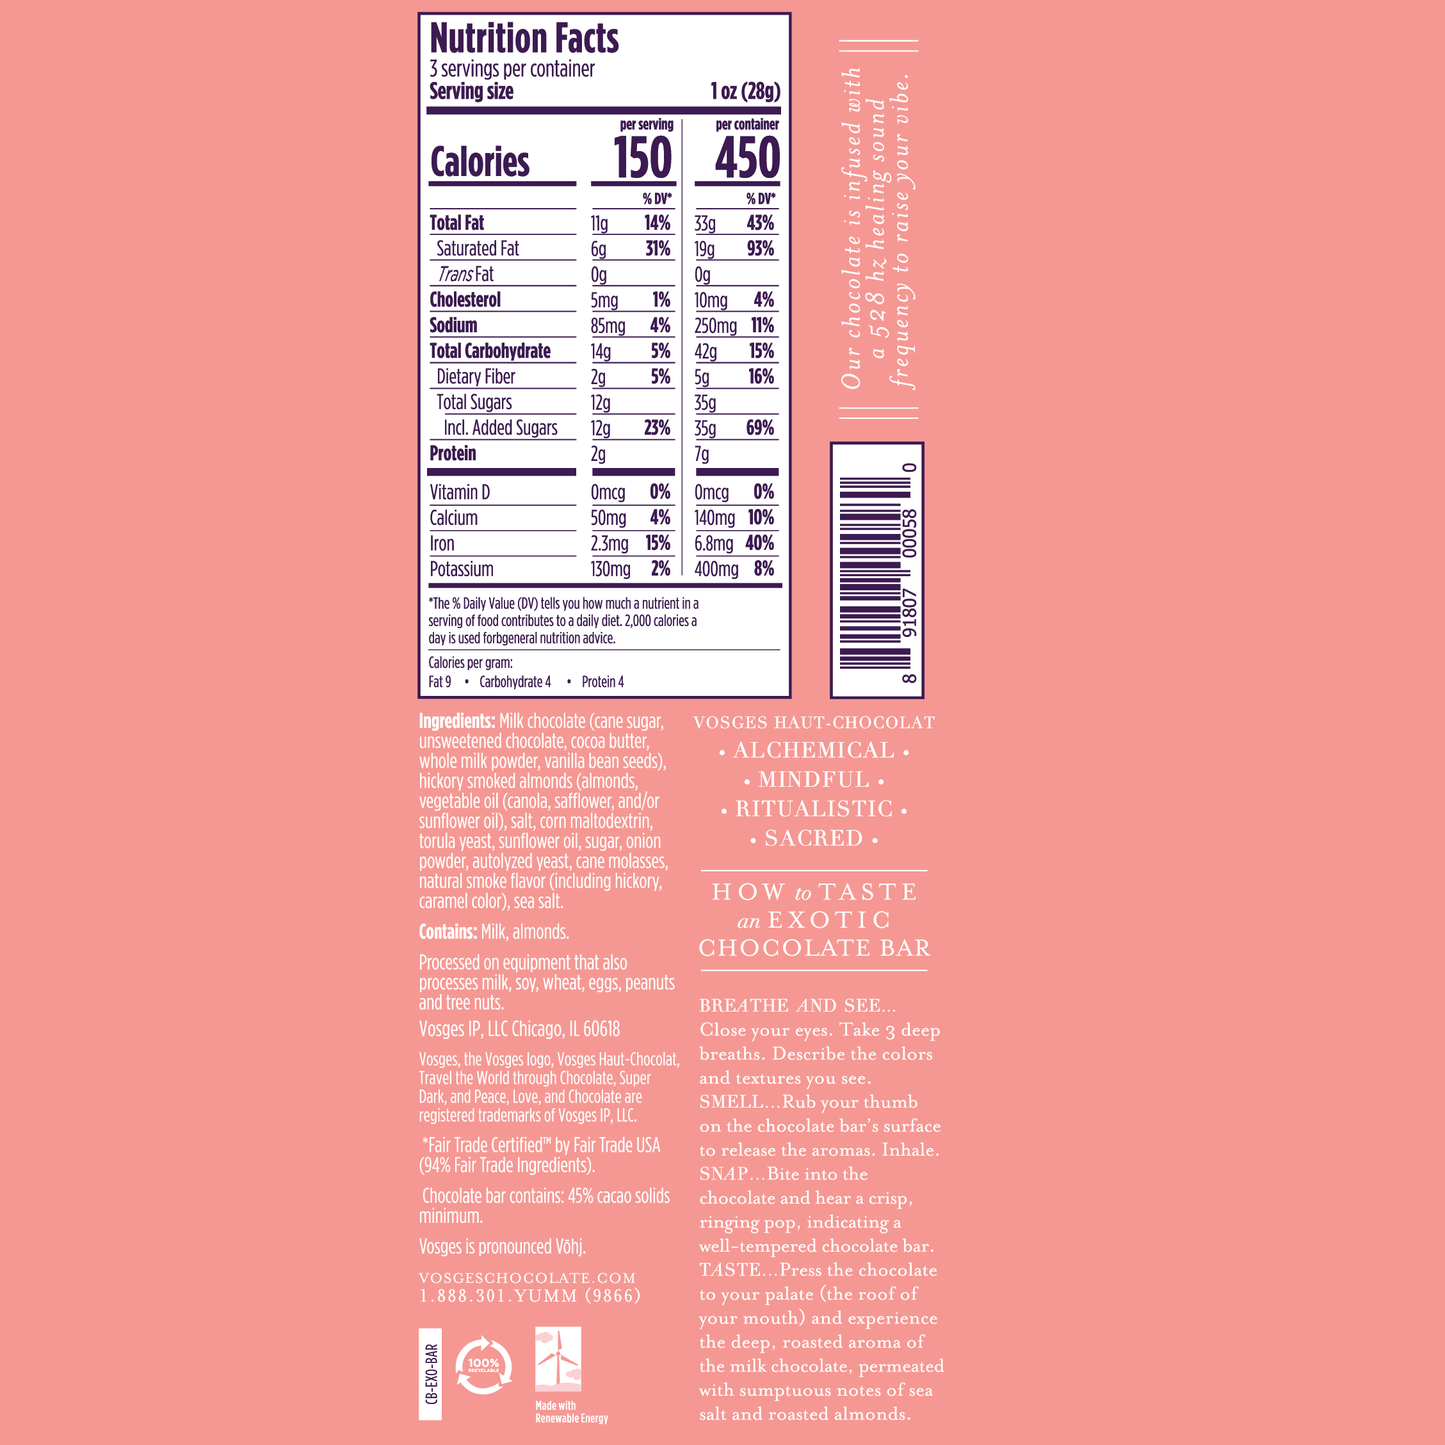 Nutrition Facts and Ingredients of Vosges Haut-Chocolat Barcelona bar in white, san-serif font on a pastel pink background.